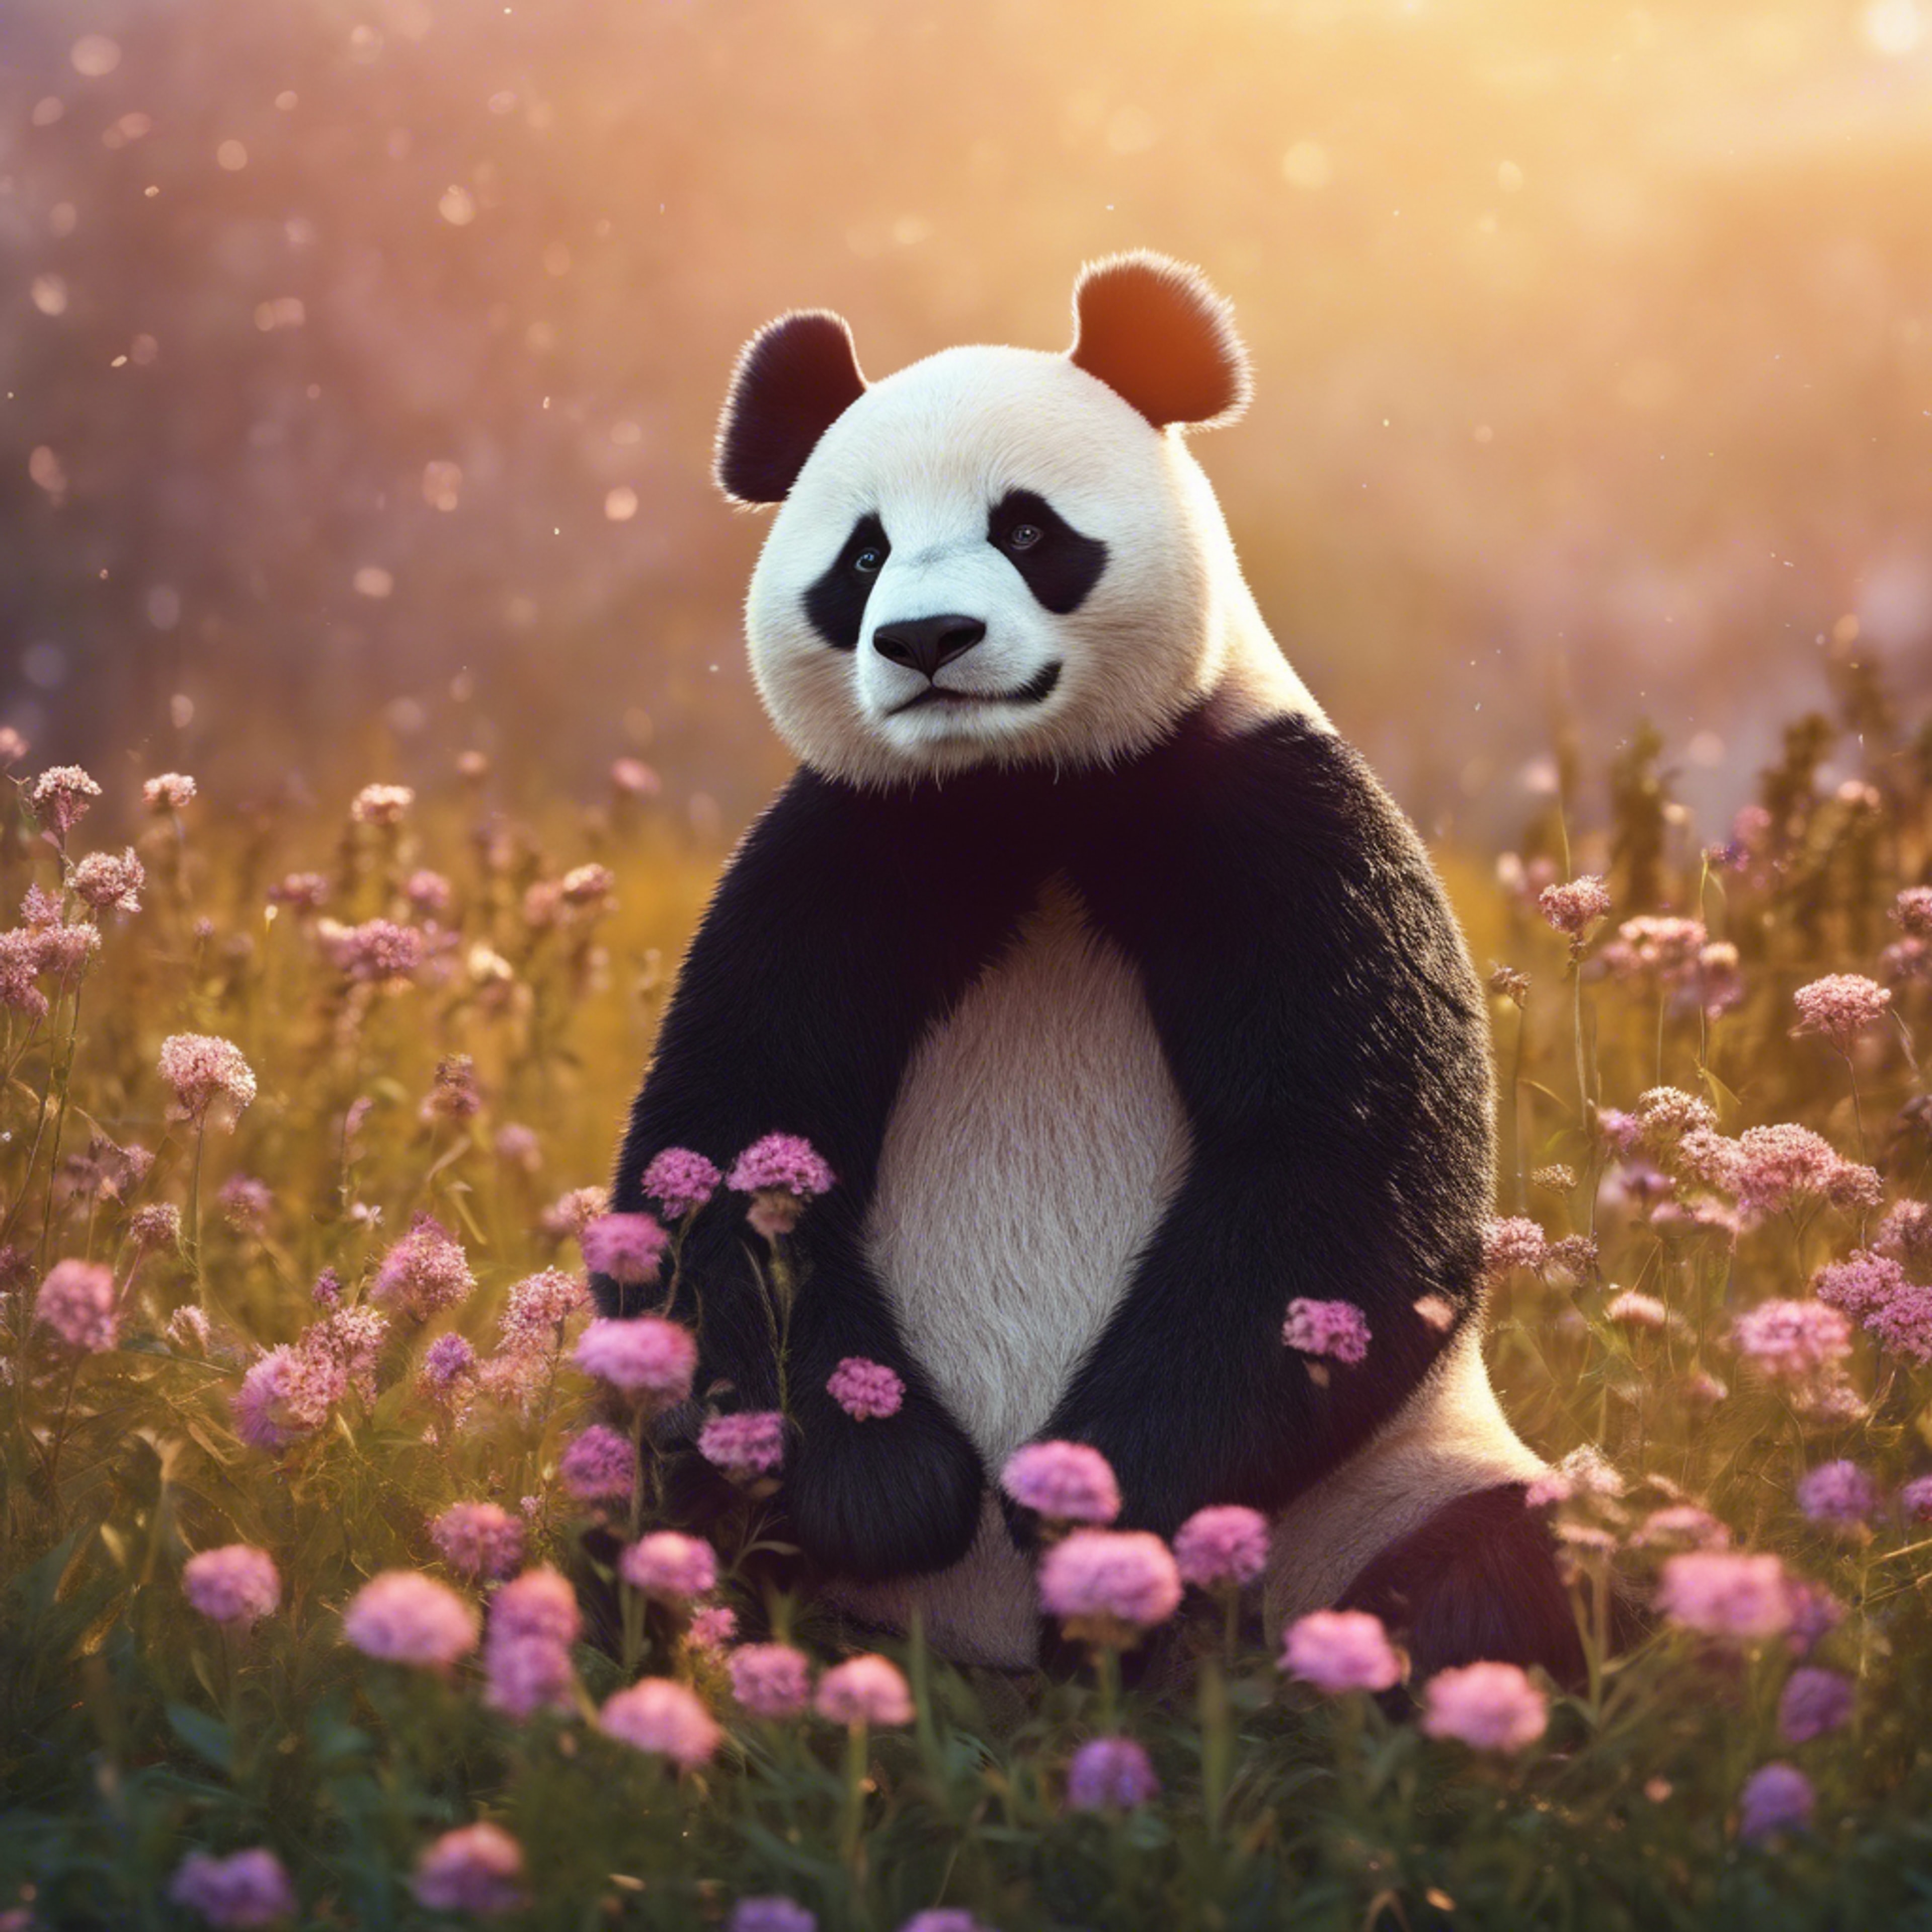 Beautiful illustration of a panda relaxing under the glow of the setting sun, surrounded by a field of wildflowers. Wallpaper[4e88d1ee586942fa837d]